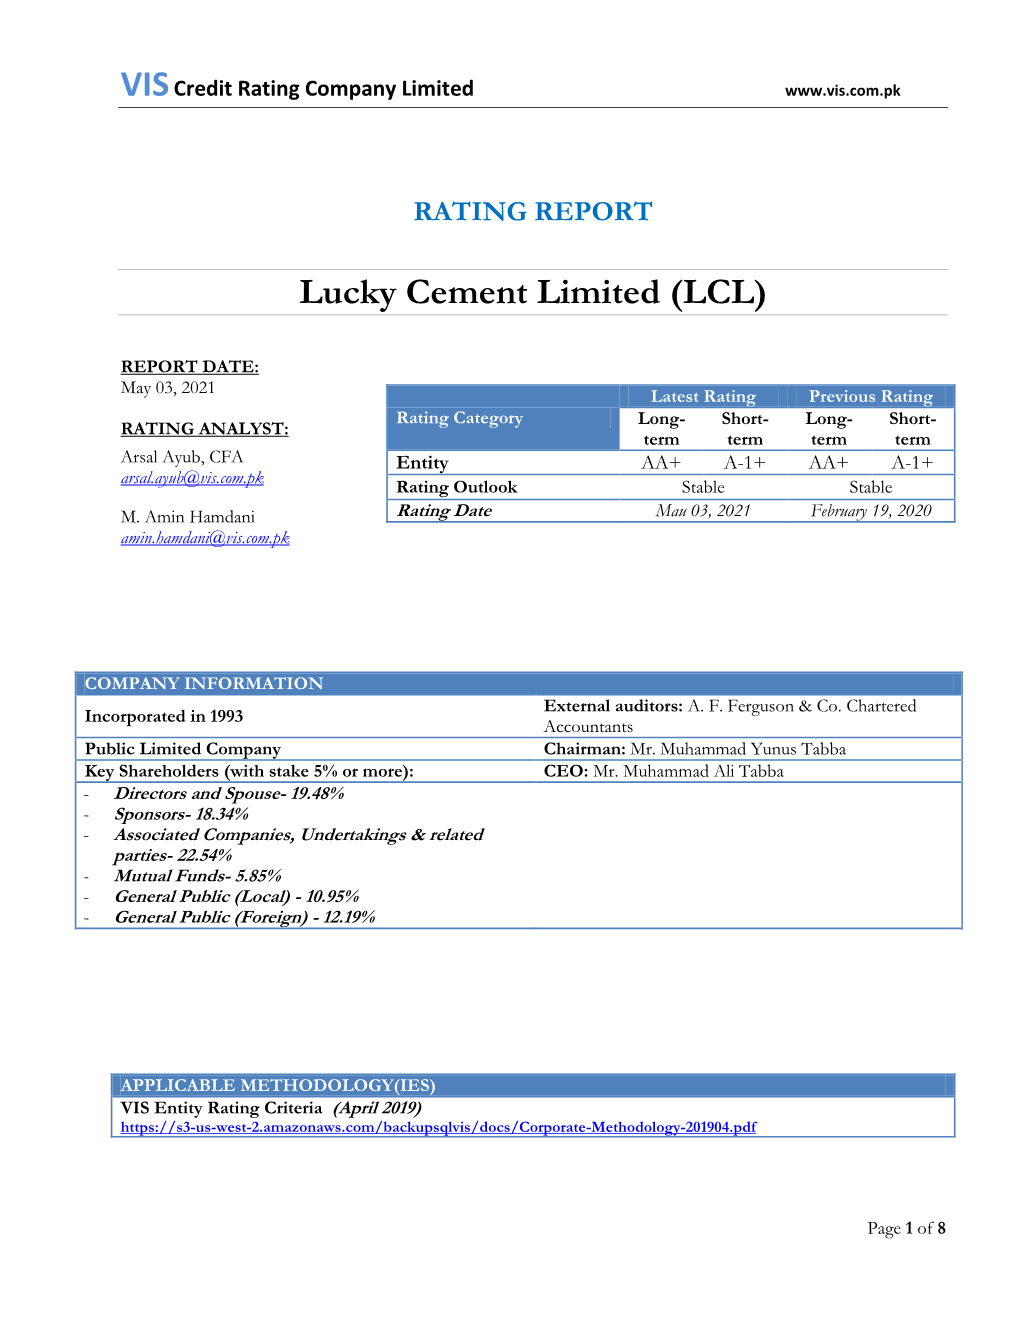 Lucky Cement Limited (LCL)